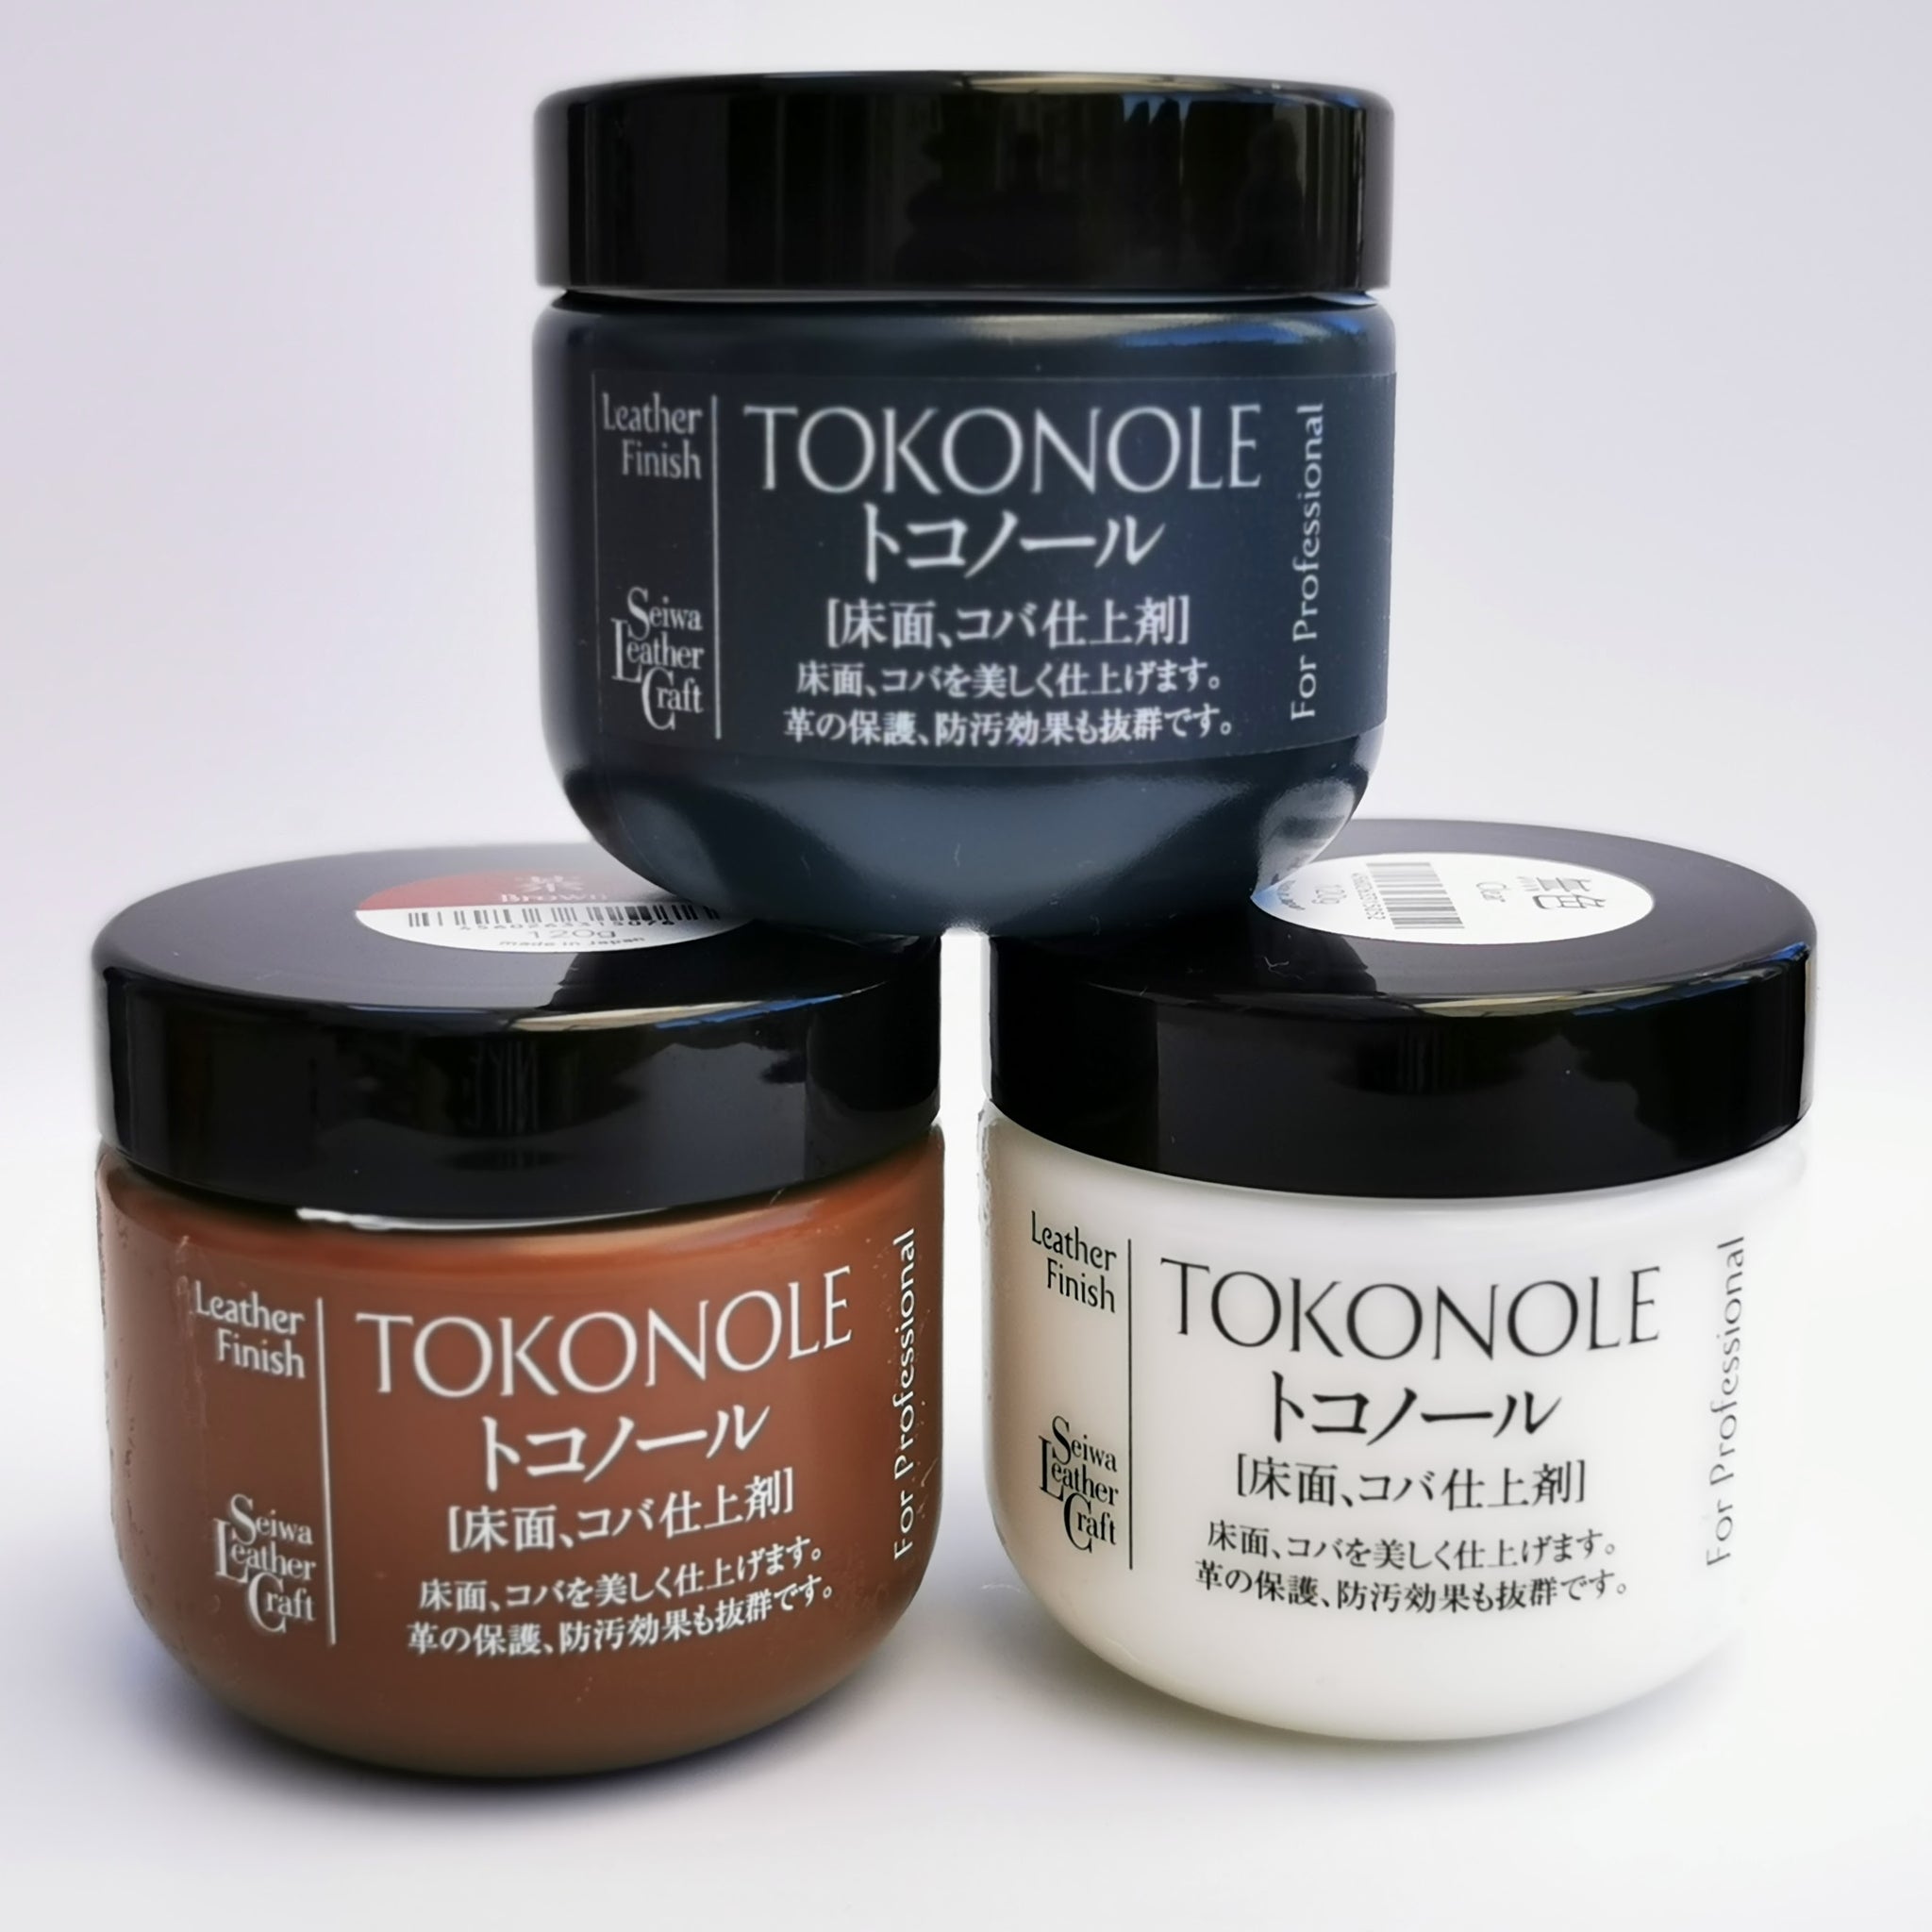 Seiwa Tokonole Burnishing Gum and Leather Finisher in India, 120g, Made in  Japan